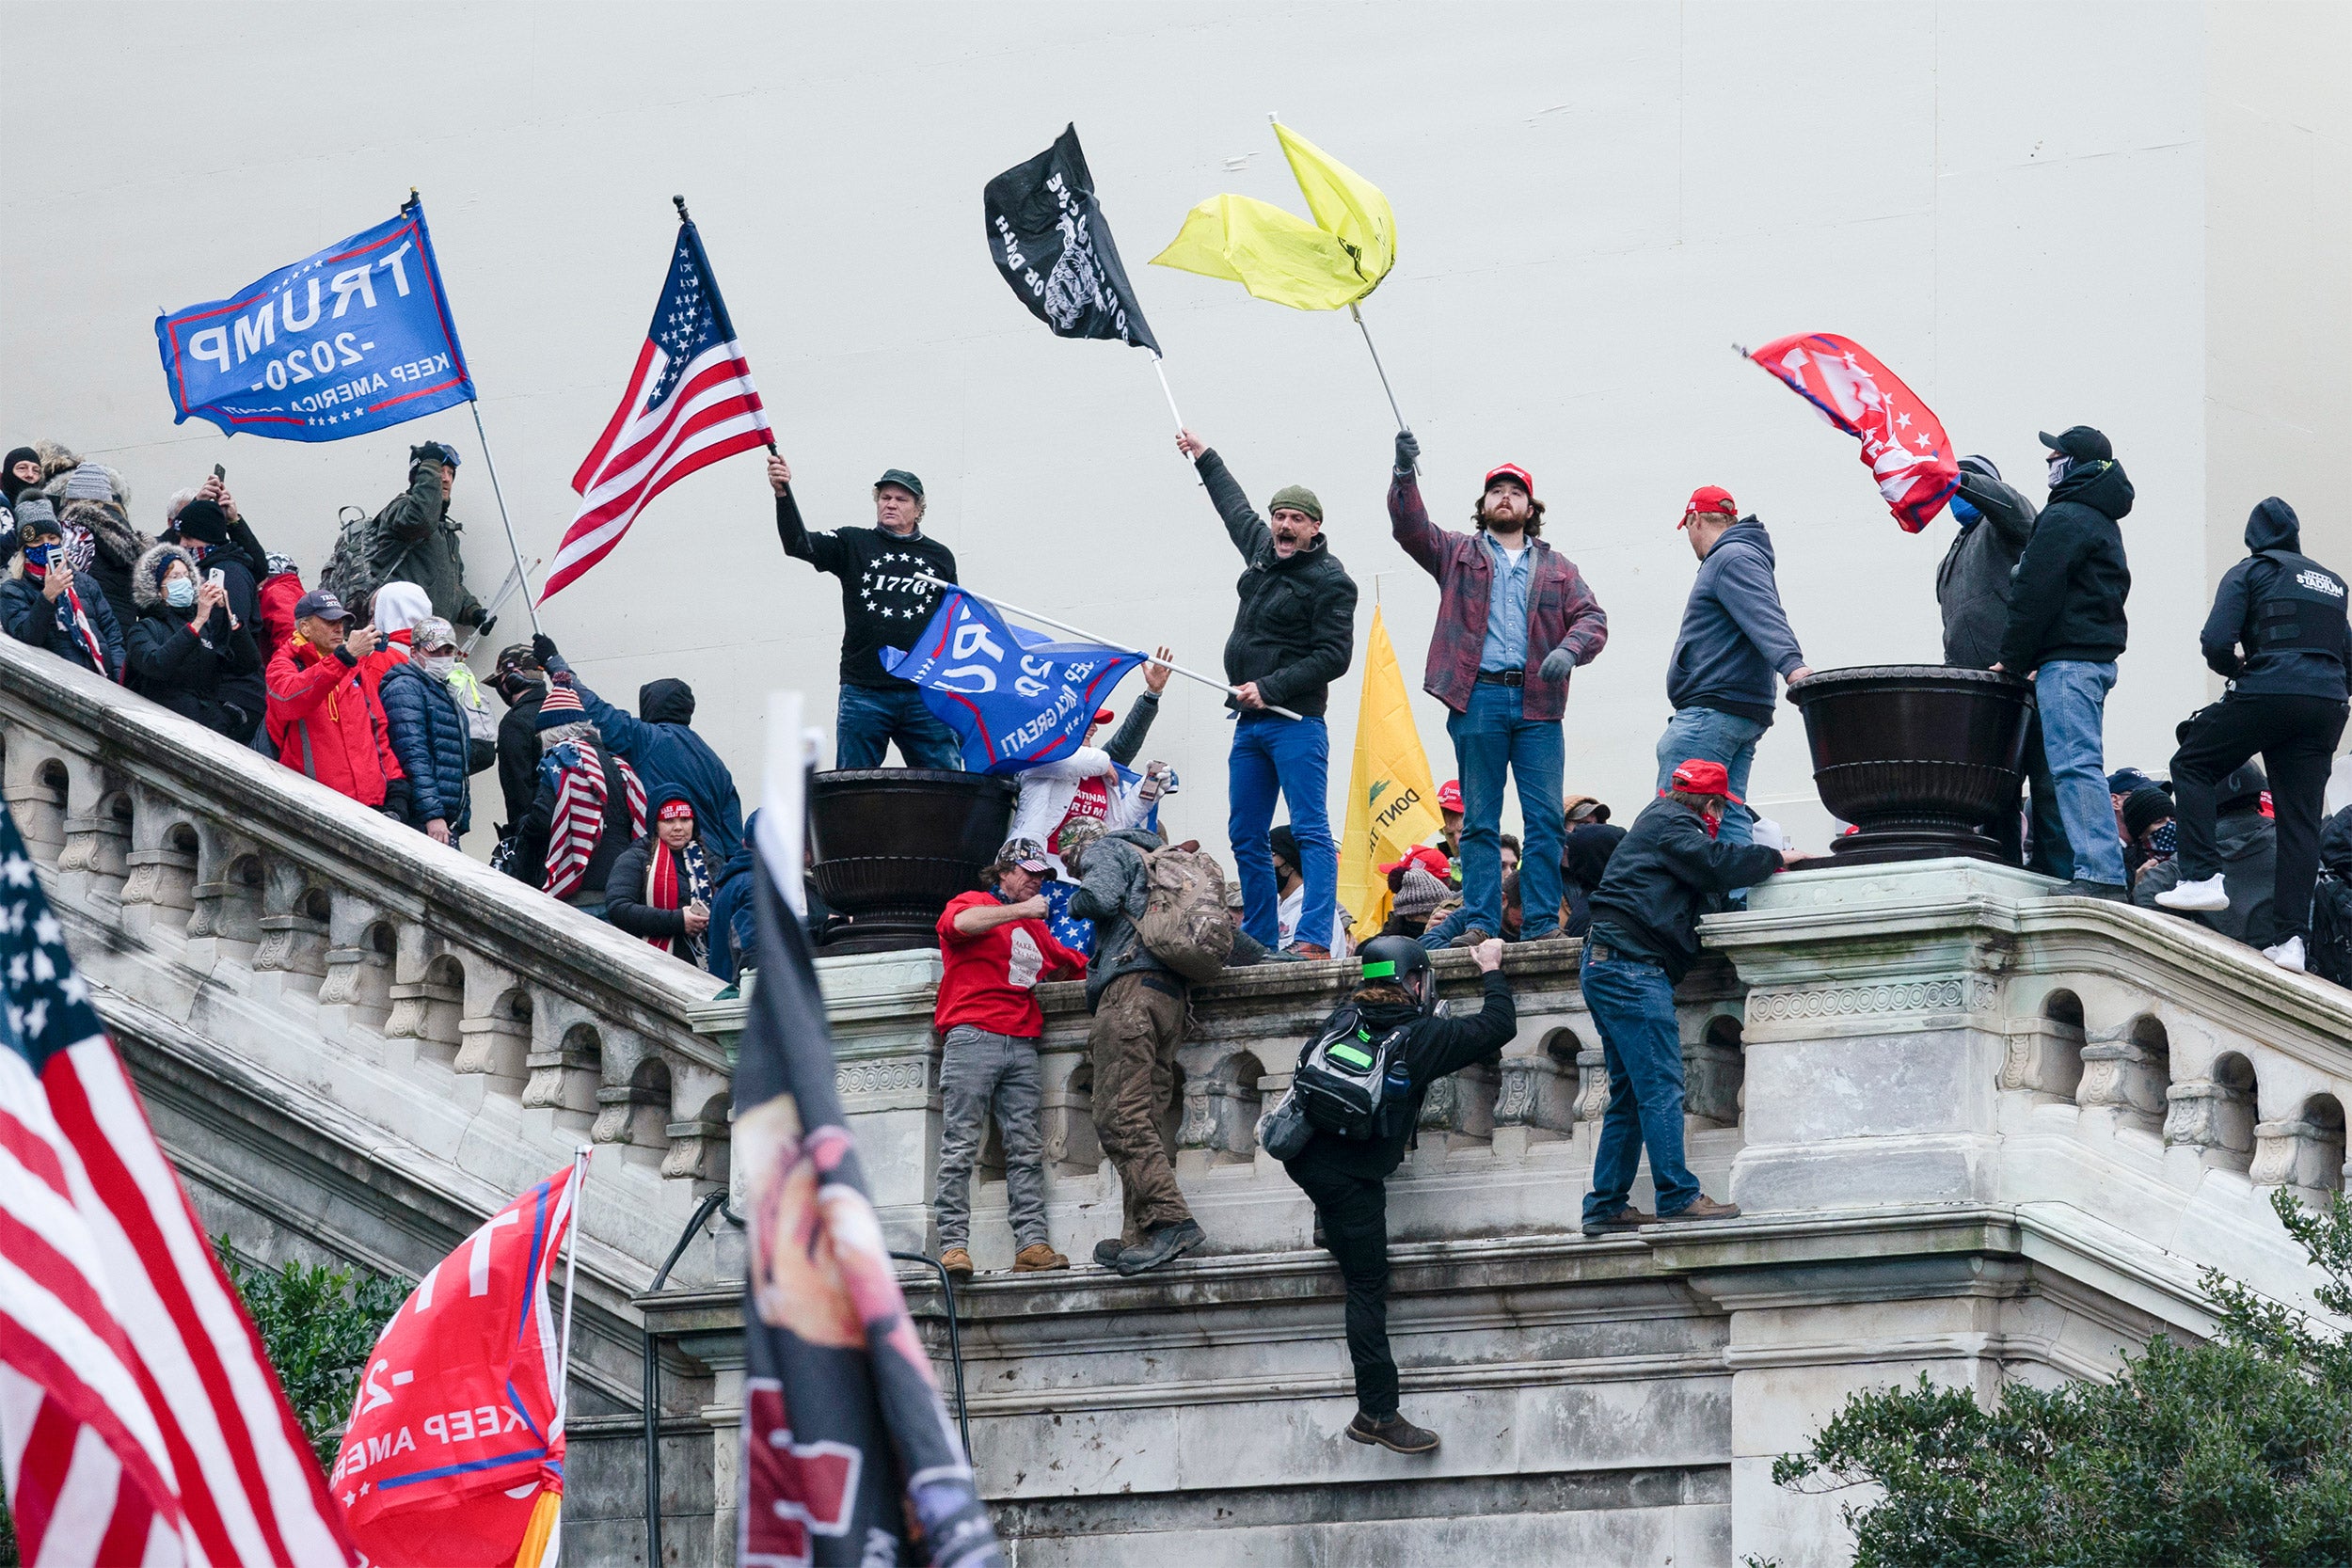 Rioters wave flags on the West Front of the U.S. Capitol in Washington on Jan. 6, 2021.